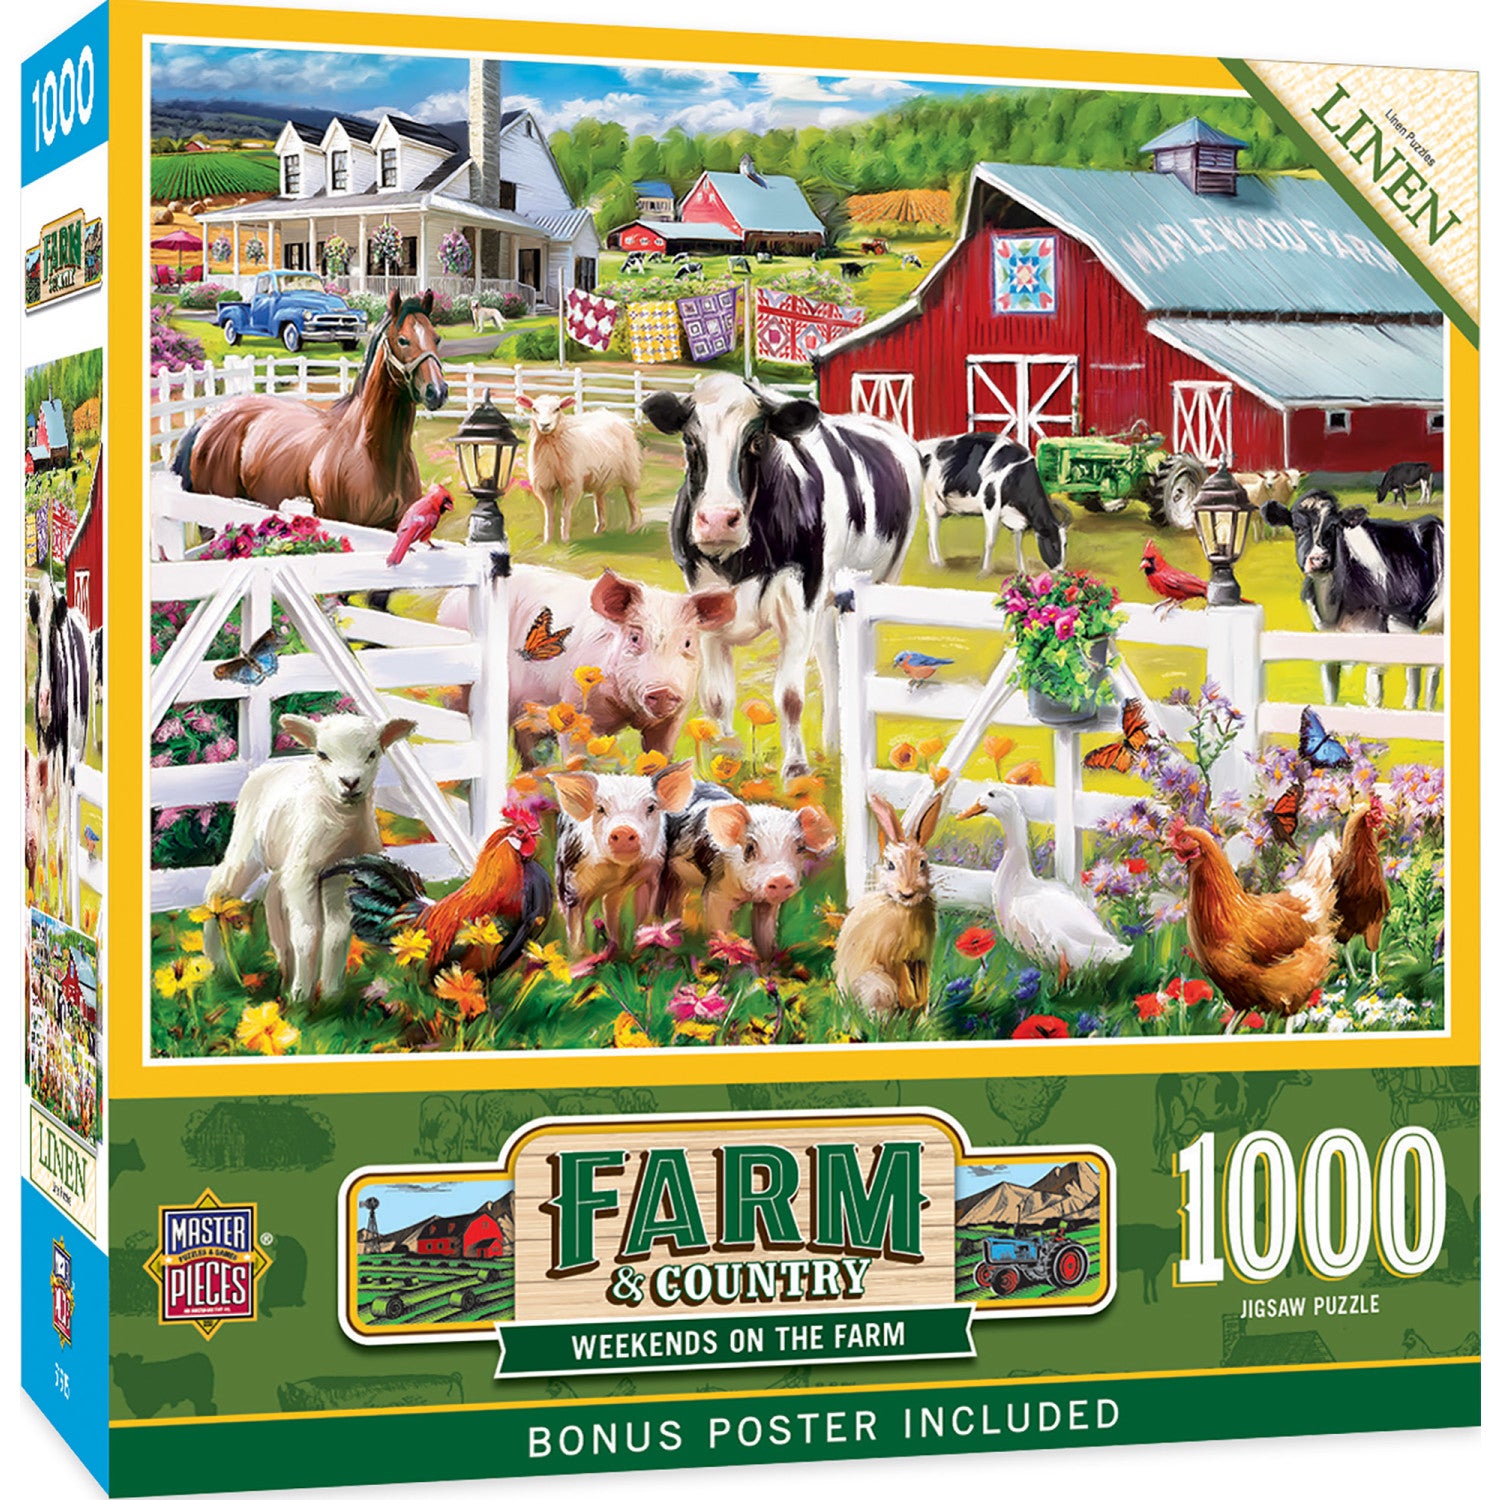 Farm & Country - Weekends On the Farm 1000 Piece Puzzle